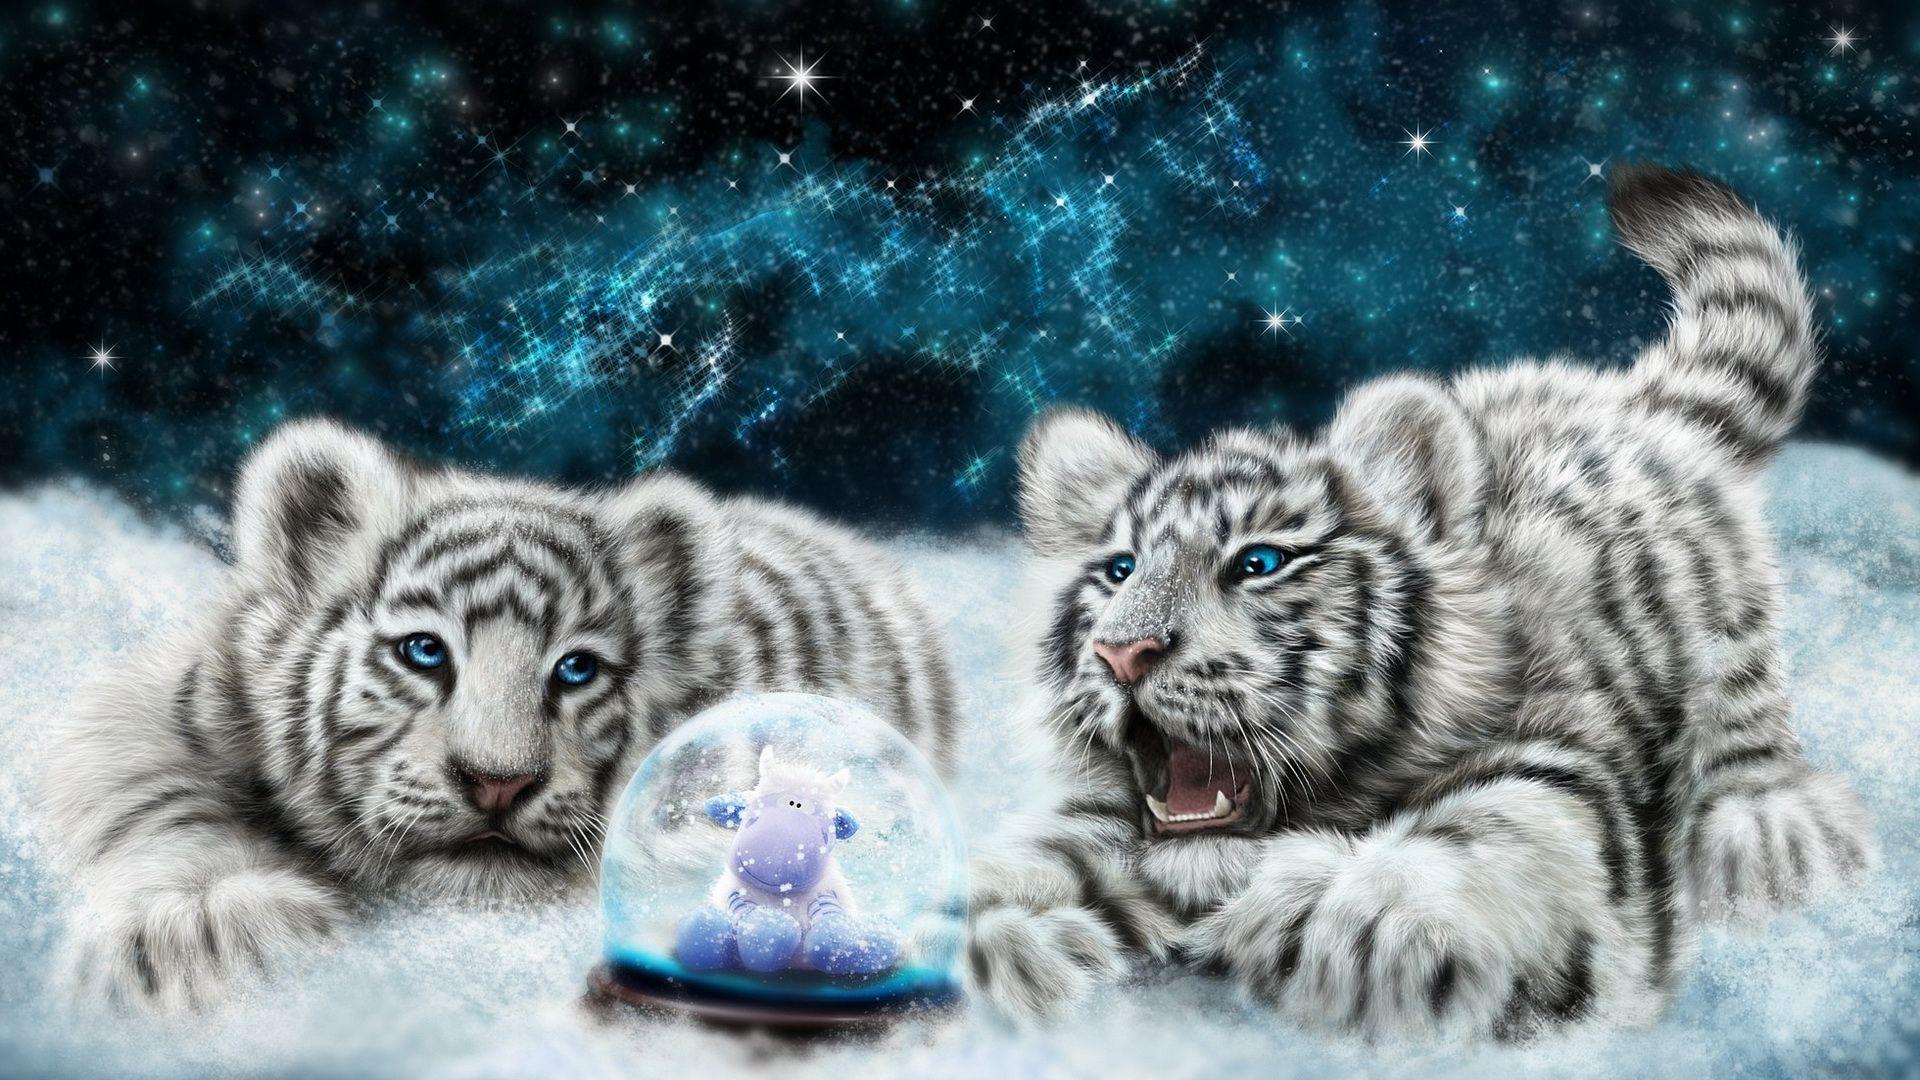 HD White tiger cubs looking at the snowglobe Wallpaper. Download